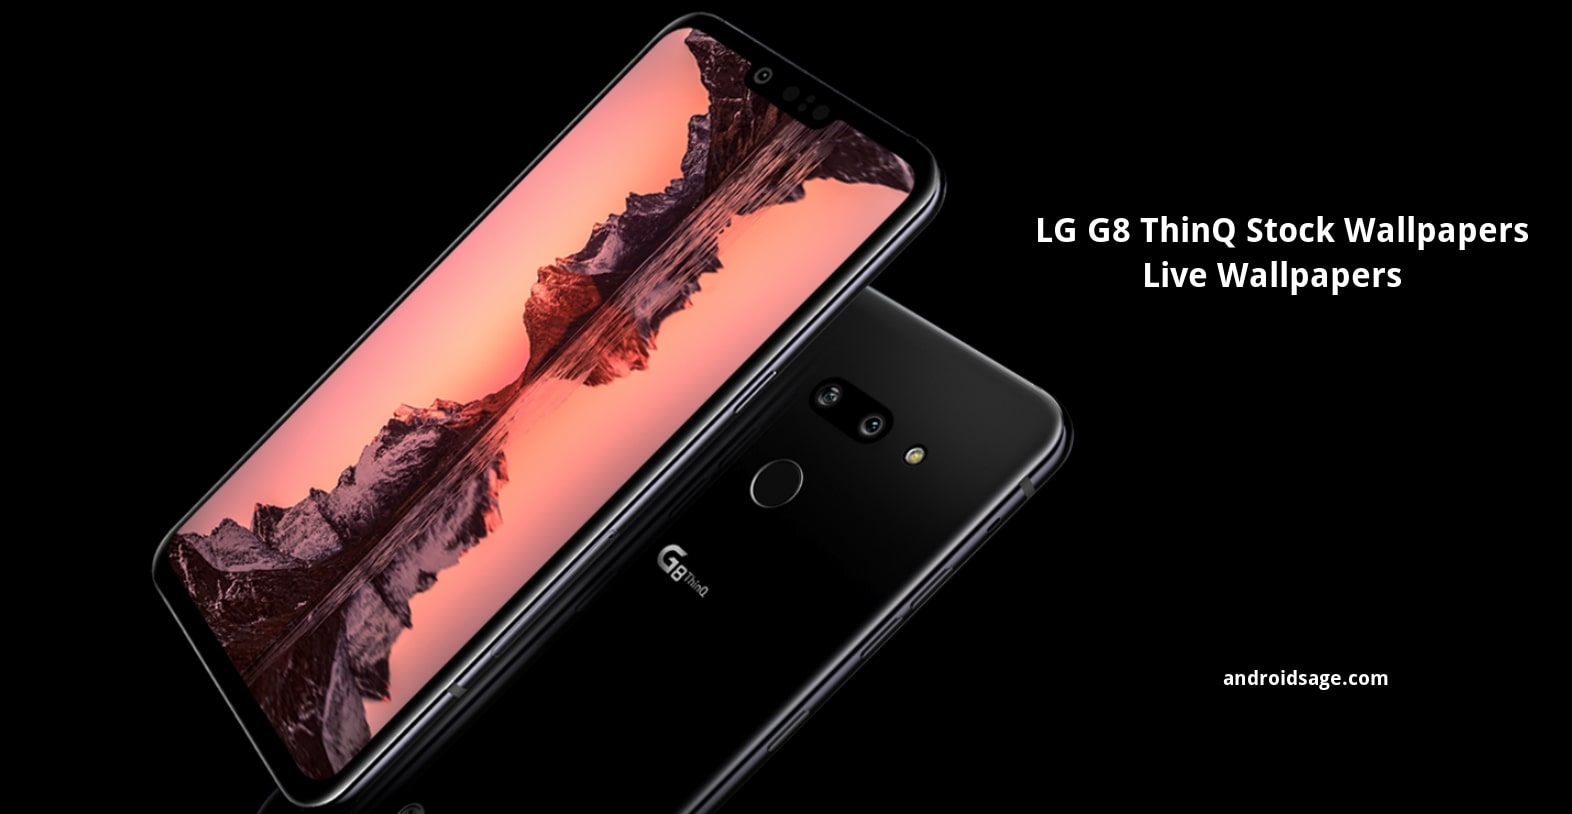 LG G8 ThinQ Stock wallpapers and live wallpapers